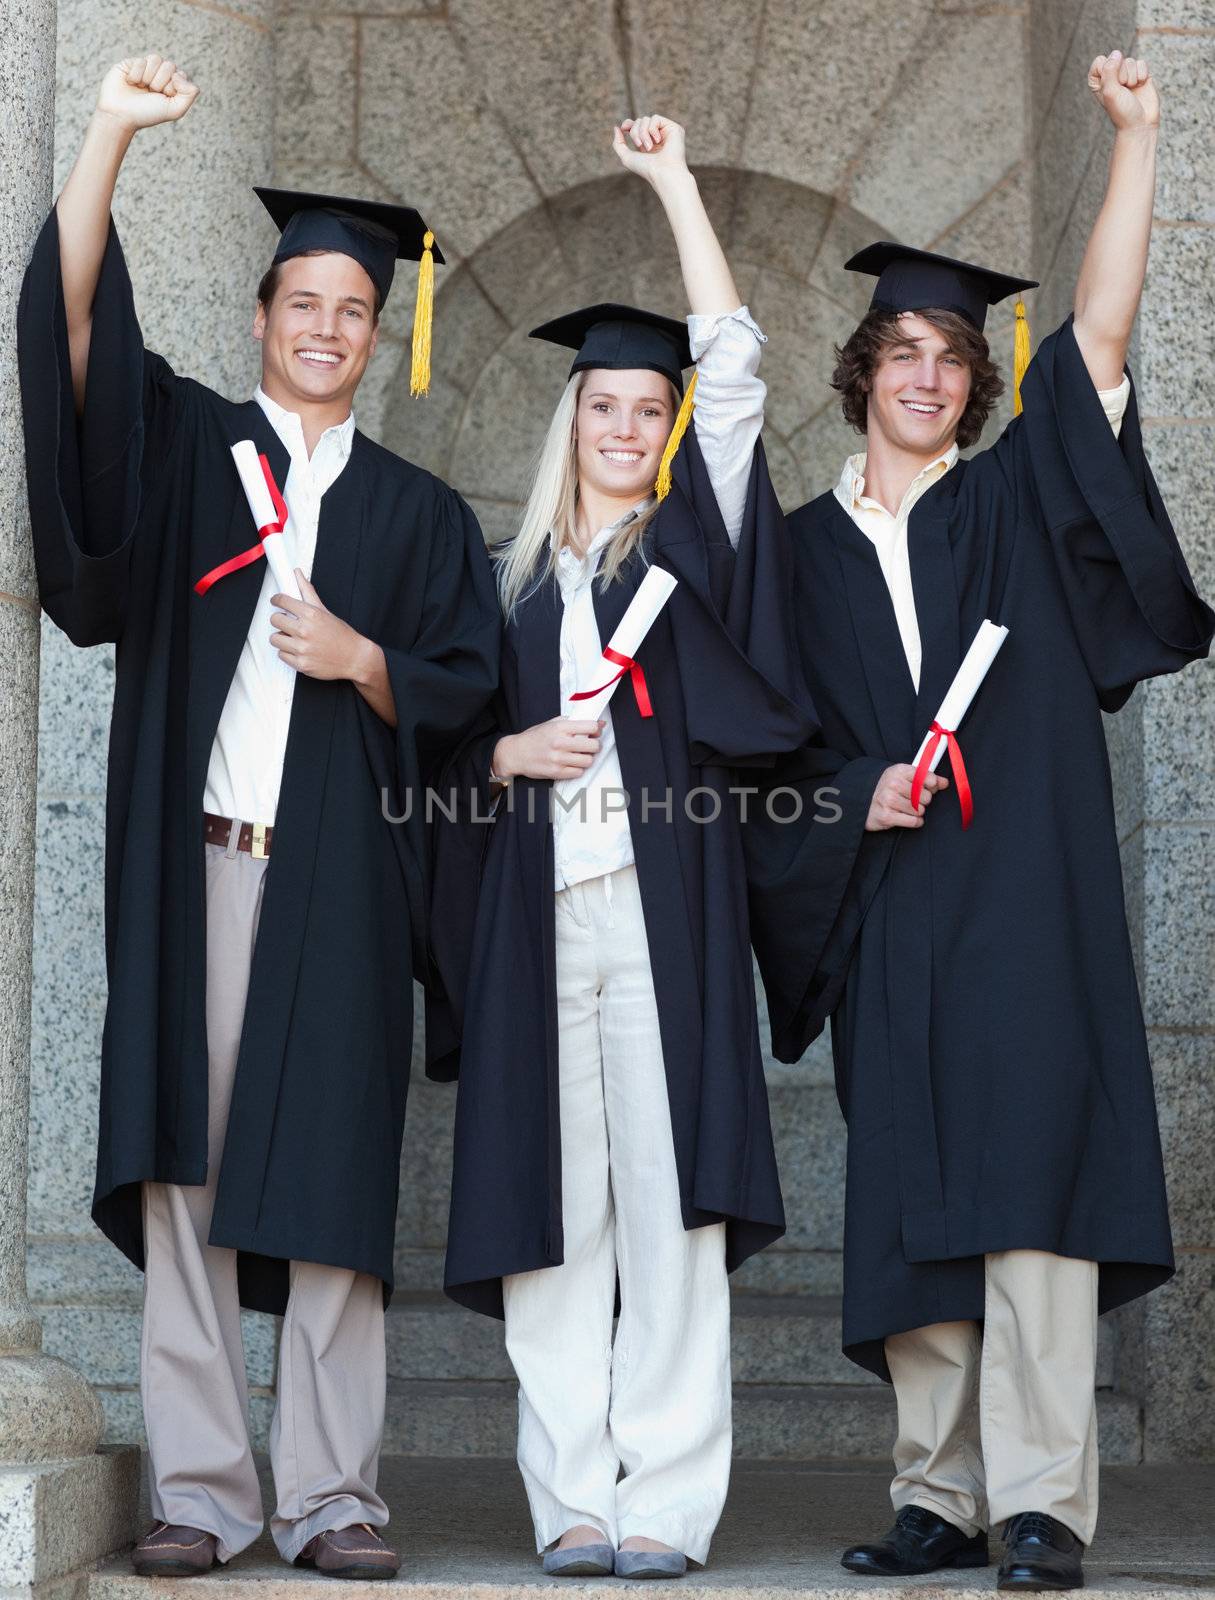 Smiling graduates raising arm with university in backgroung